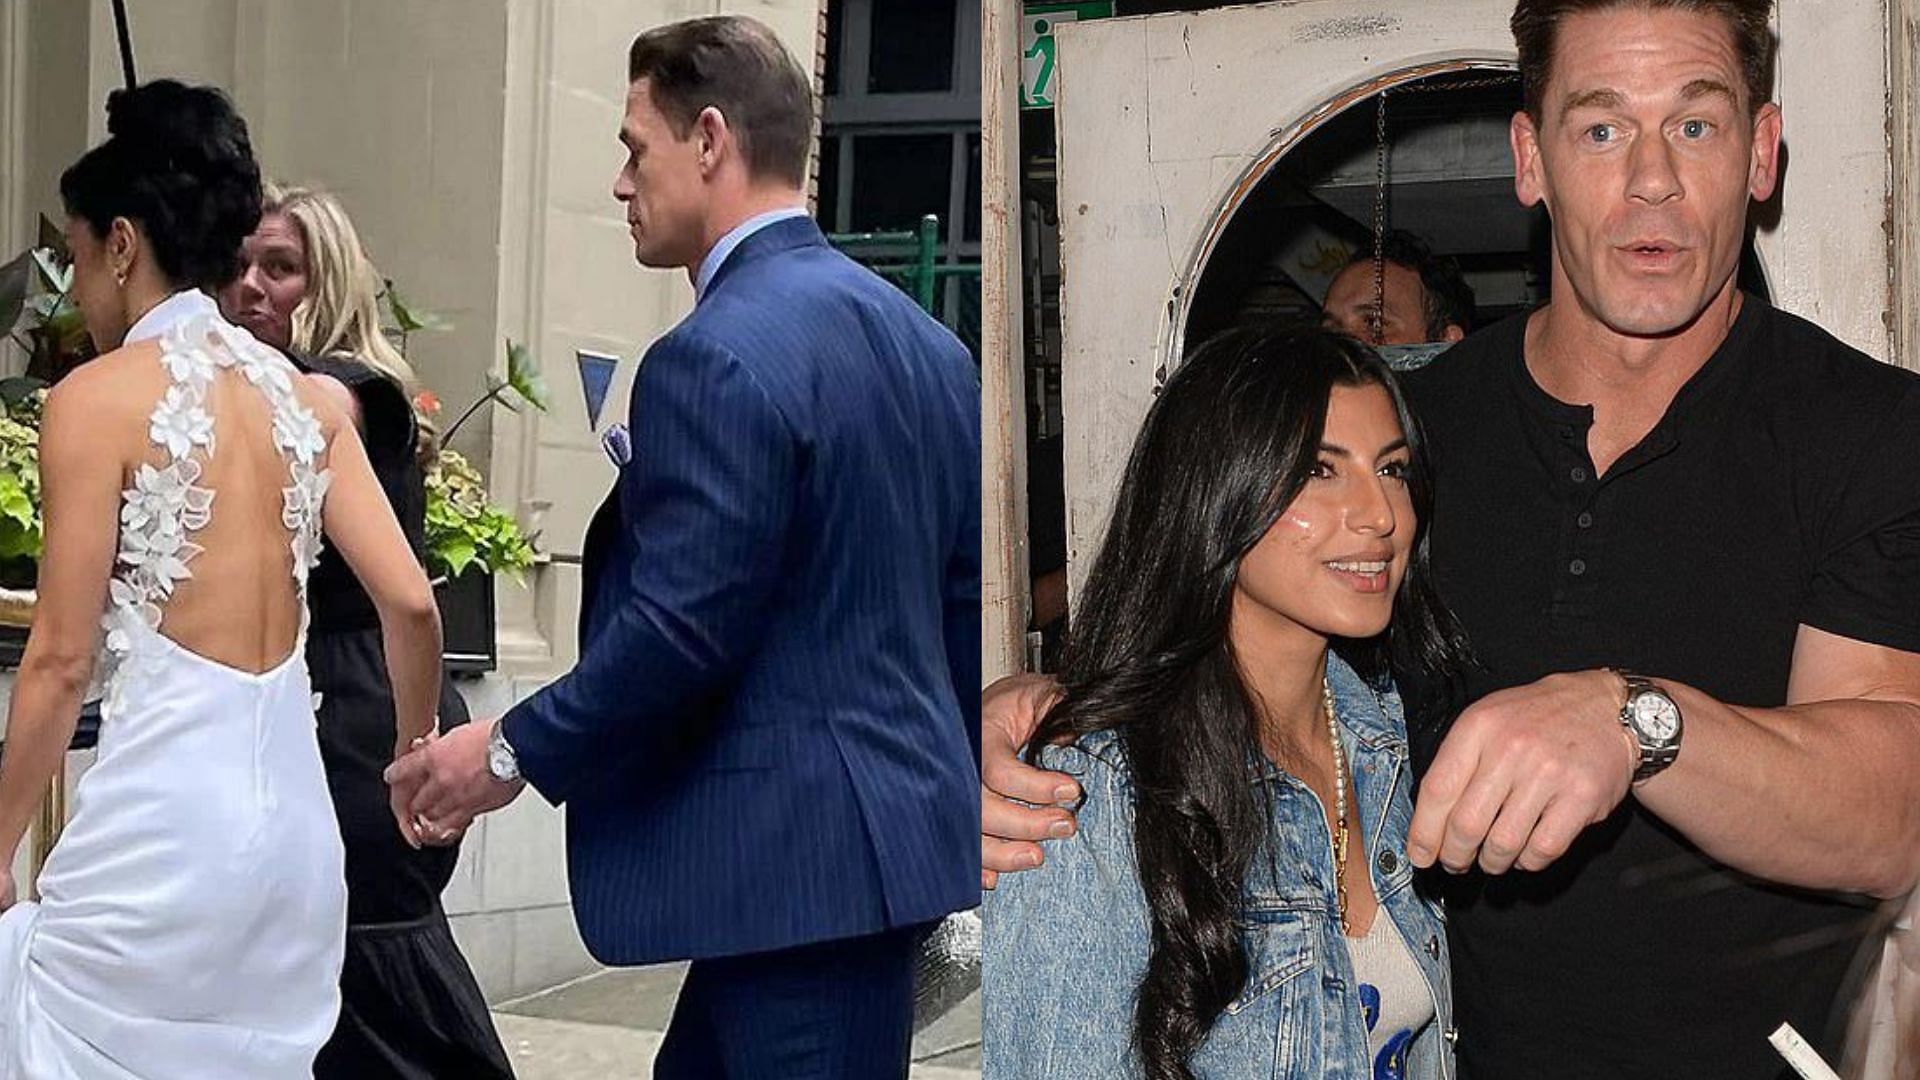 John Cena and his wife Shay Shariatzadeh first tied the knot in 2020